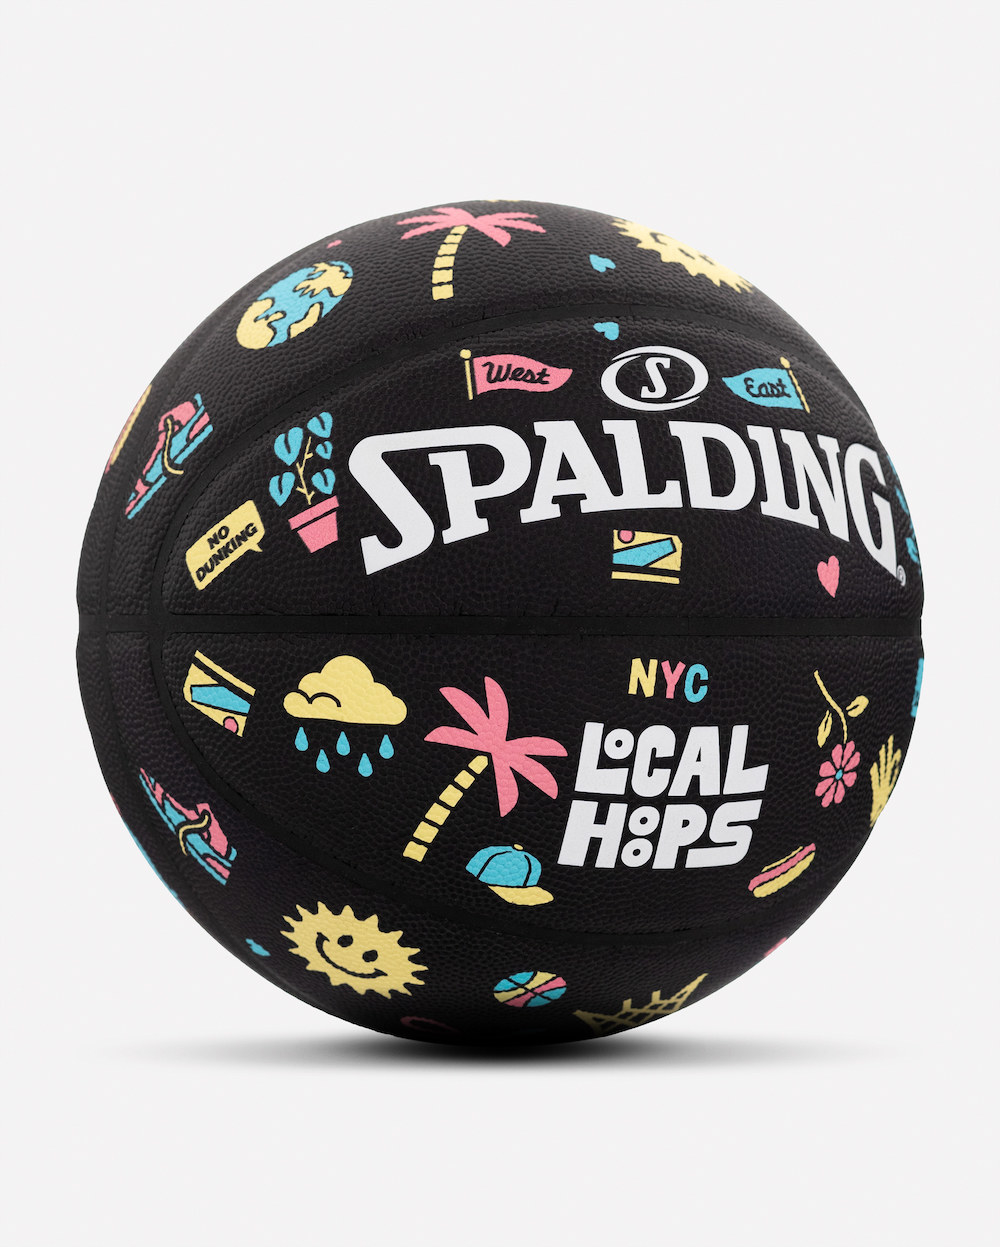 Spalding x Local Hoops Basketball Collaboration